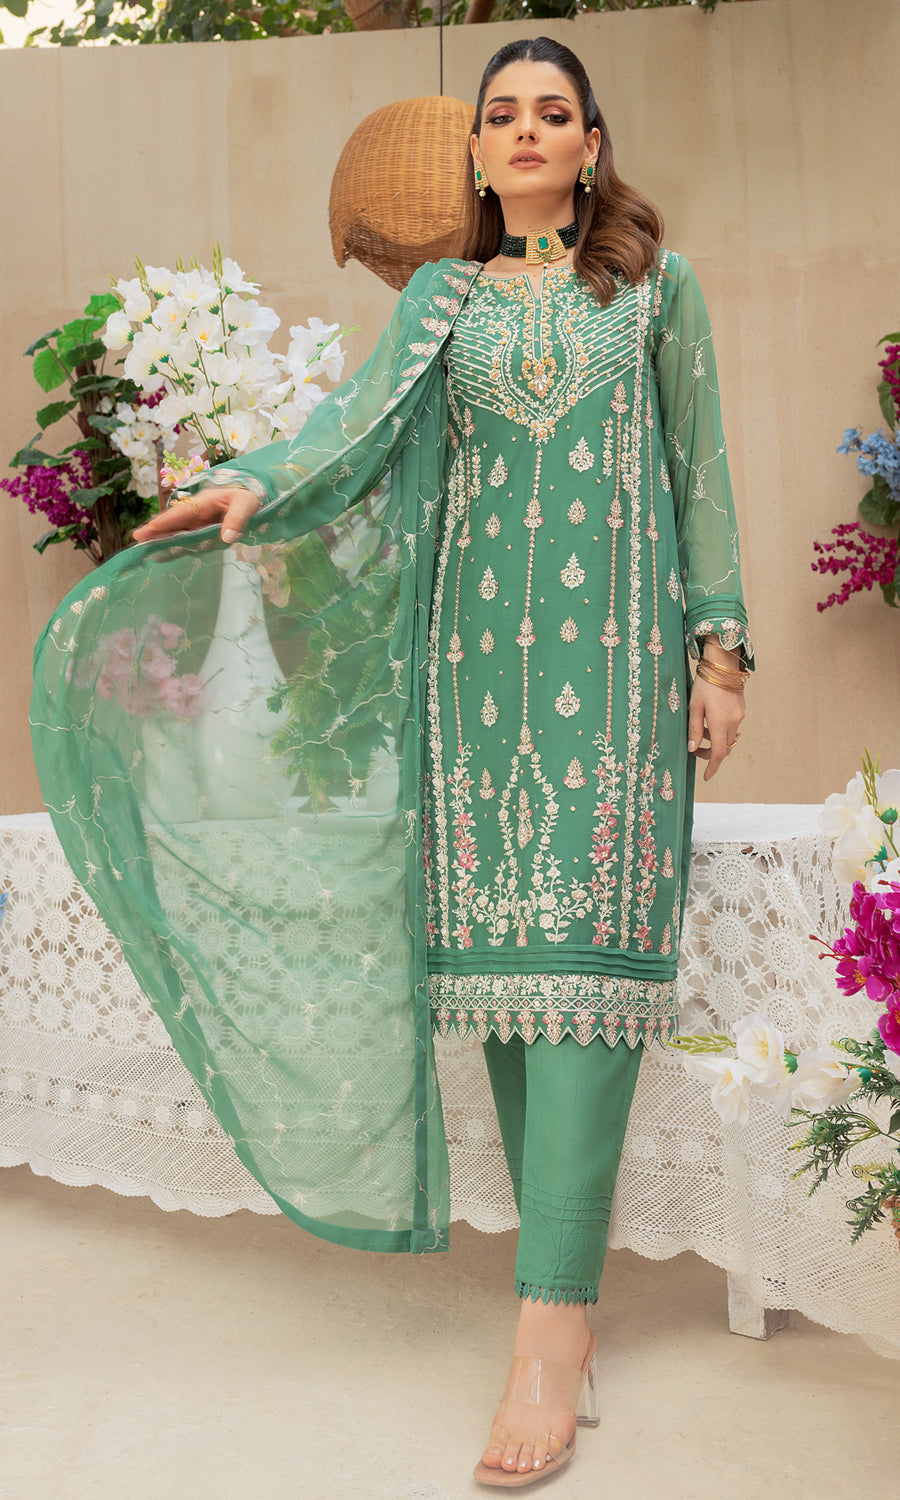 Shamooz-Mushq Volume 3. Step into elegance with this masterpiece with vibrant color and embrodiery work on the front and side panel that enhances a pop of color and elevate the design.The delicately hand-embellished adds a touch of glamour.This ensemble is a perfect balance of elegance.